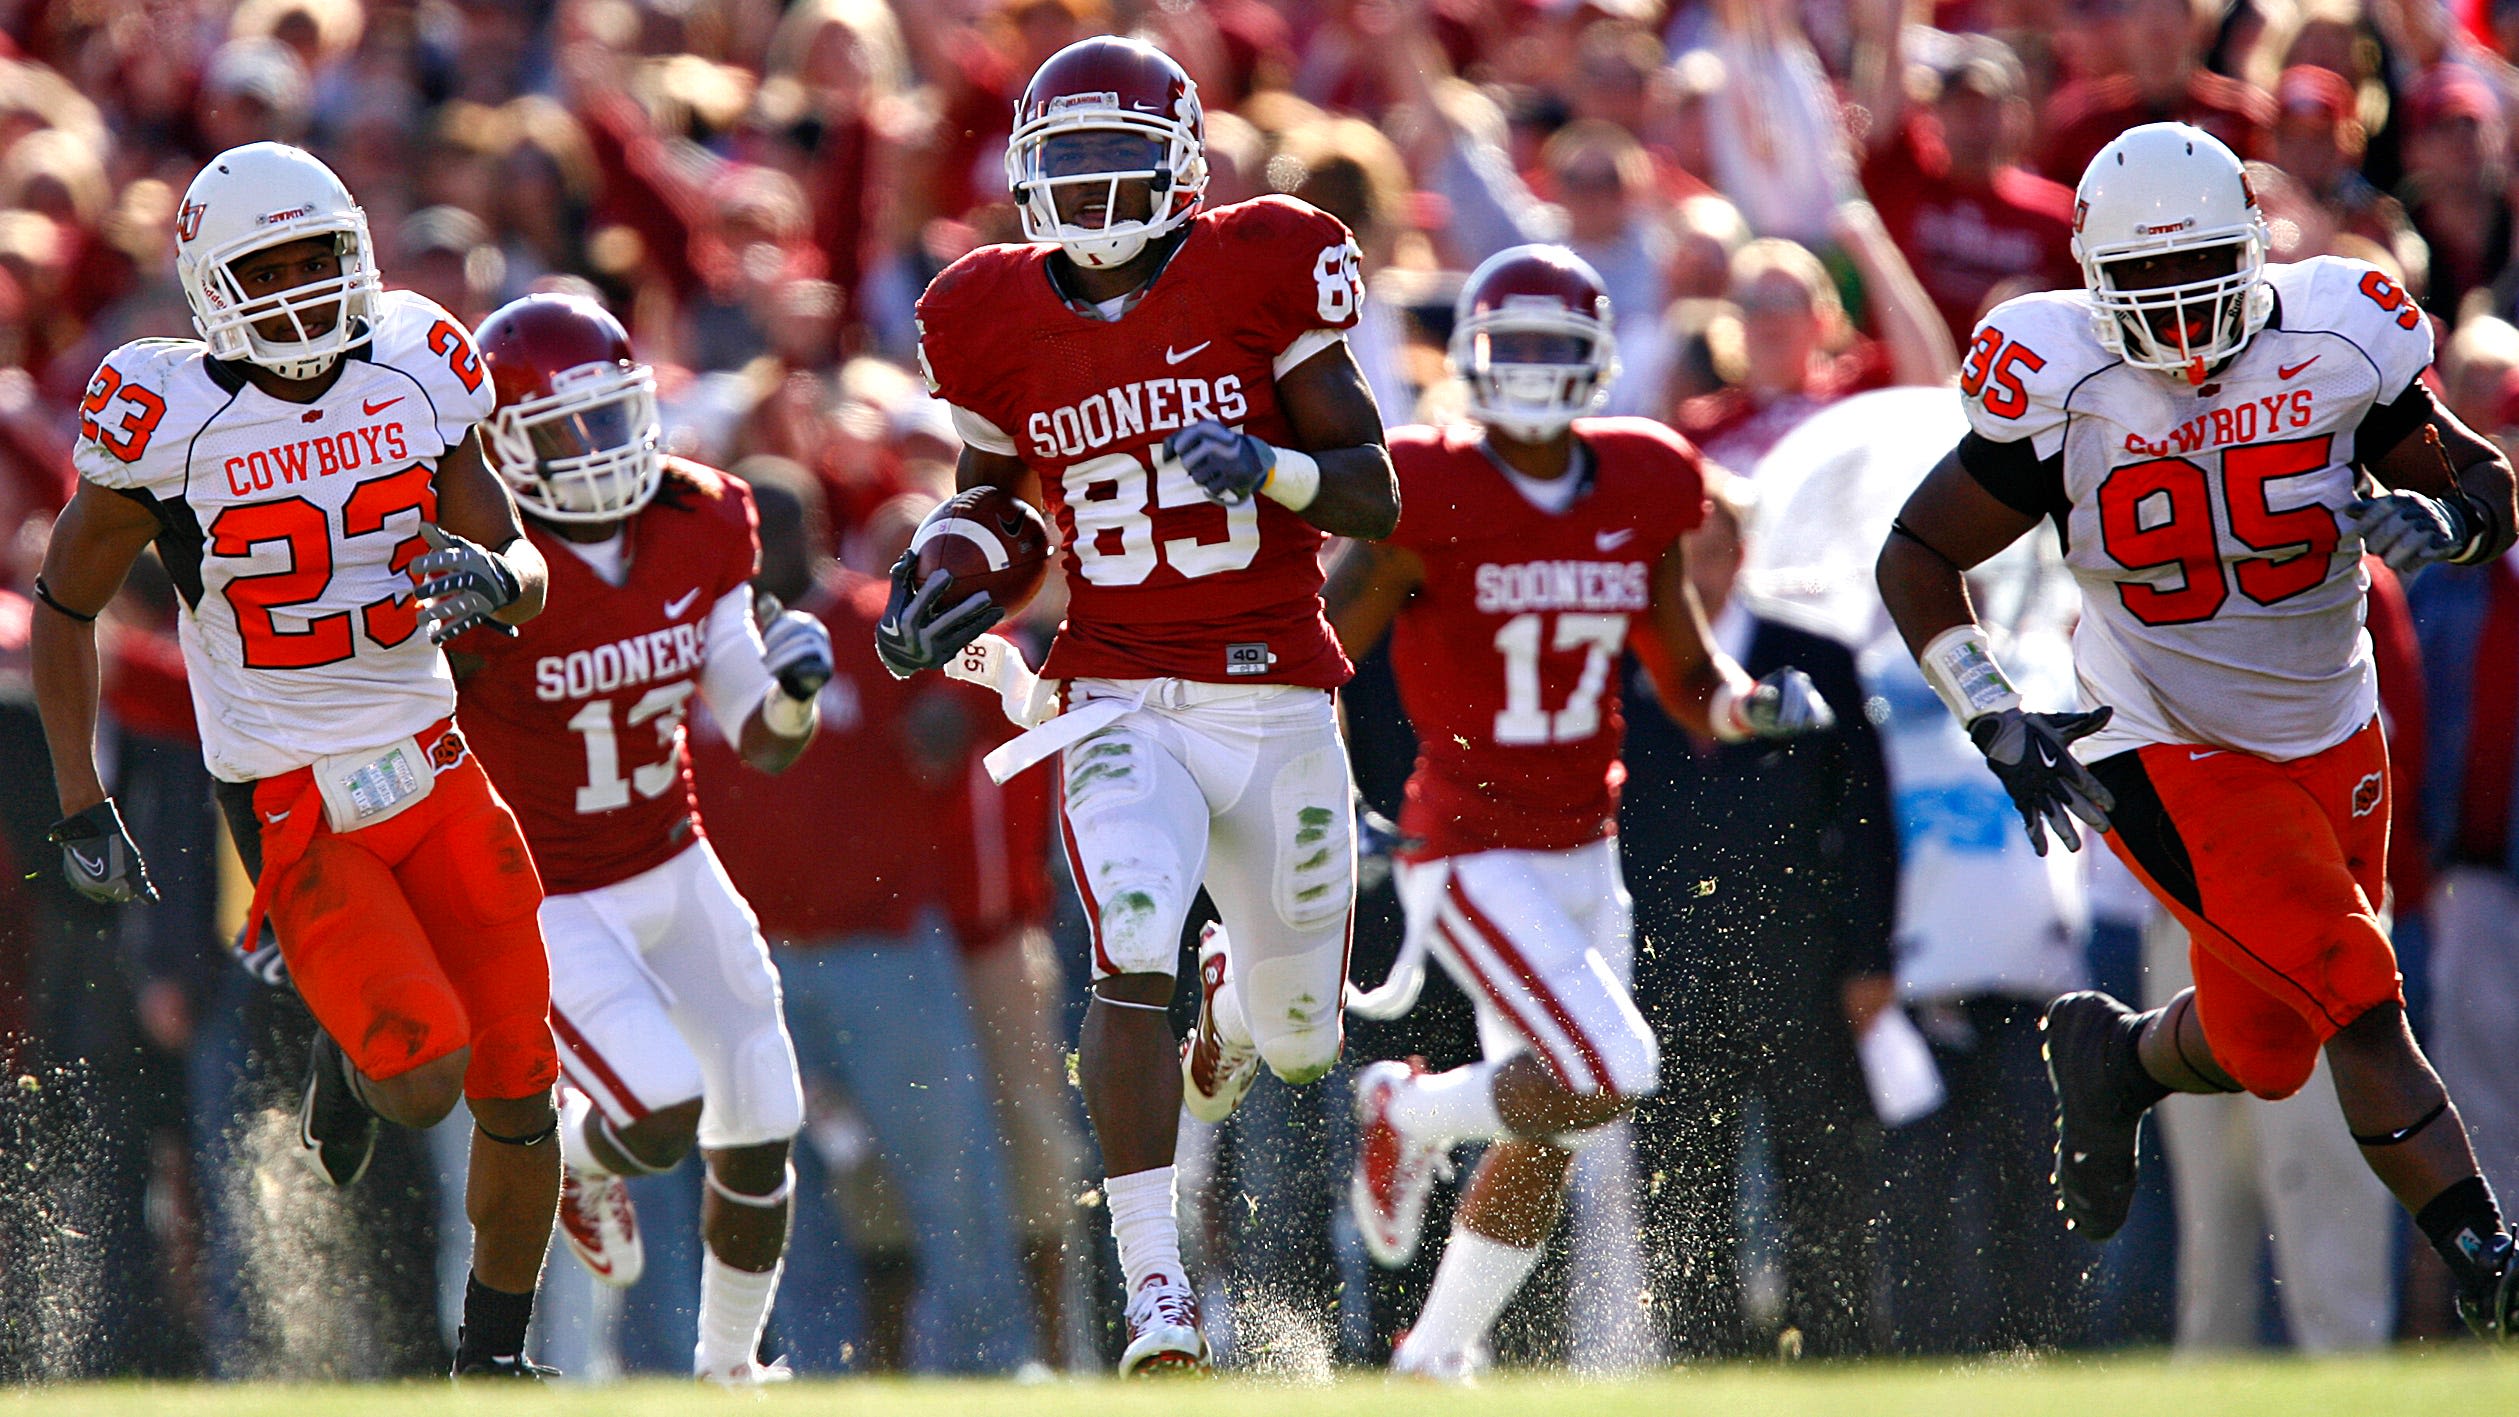 OU football legend Ryan Broyles alleges racial incident from campus fraternity house